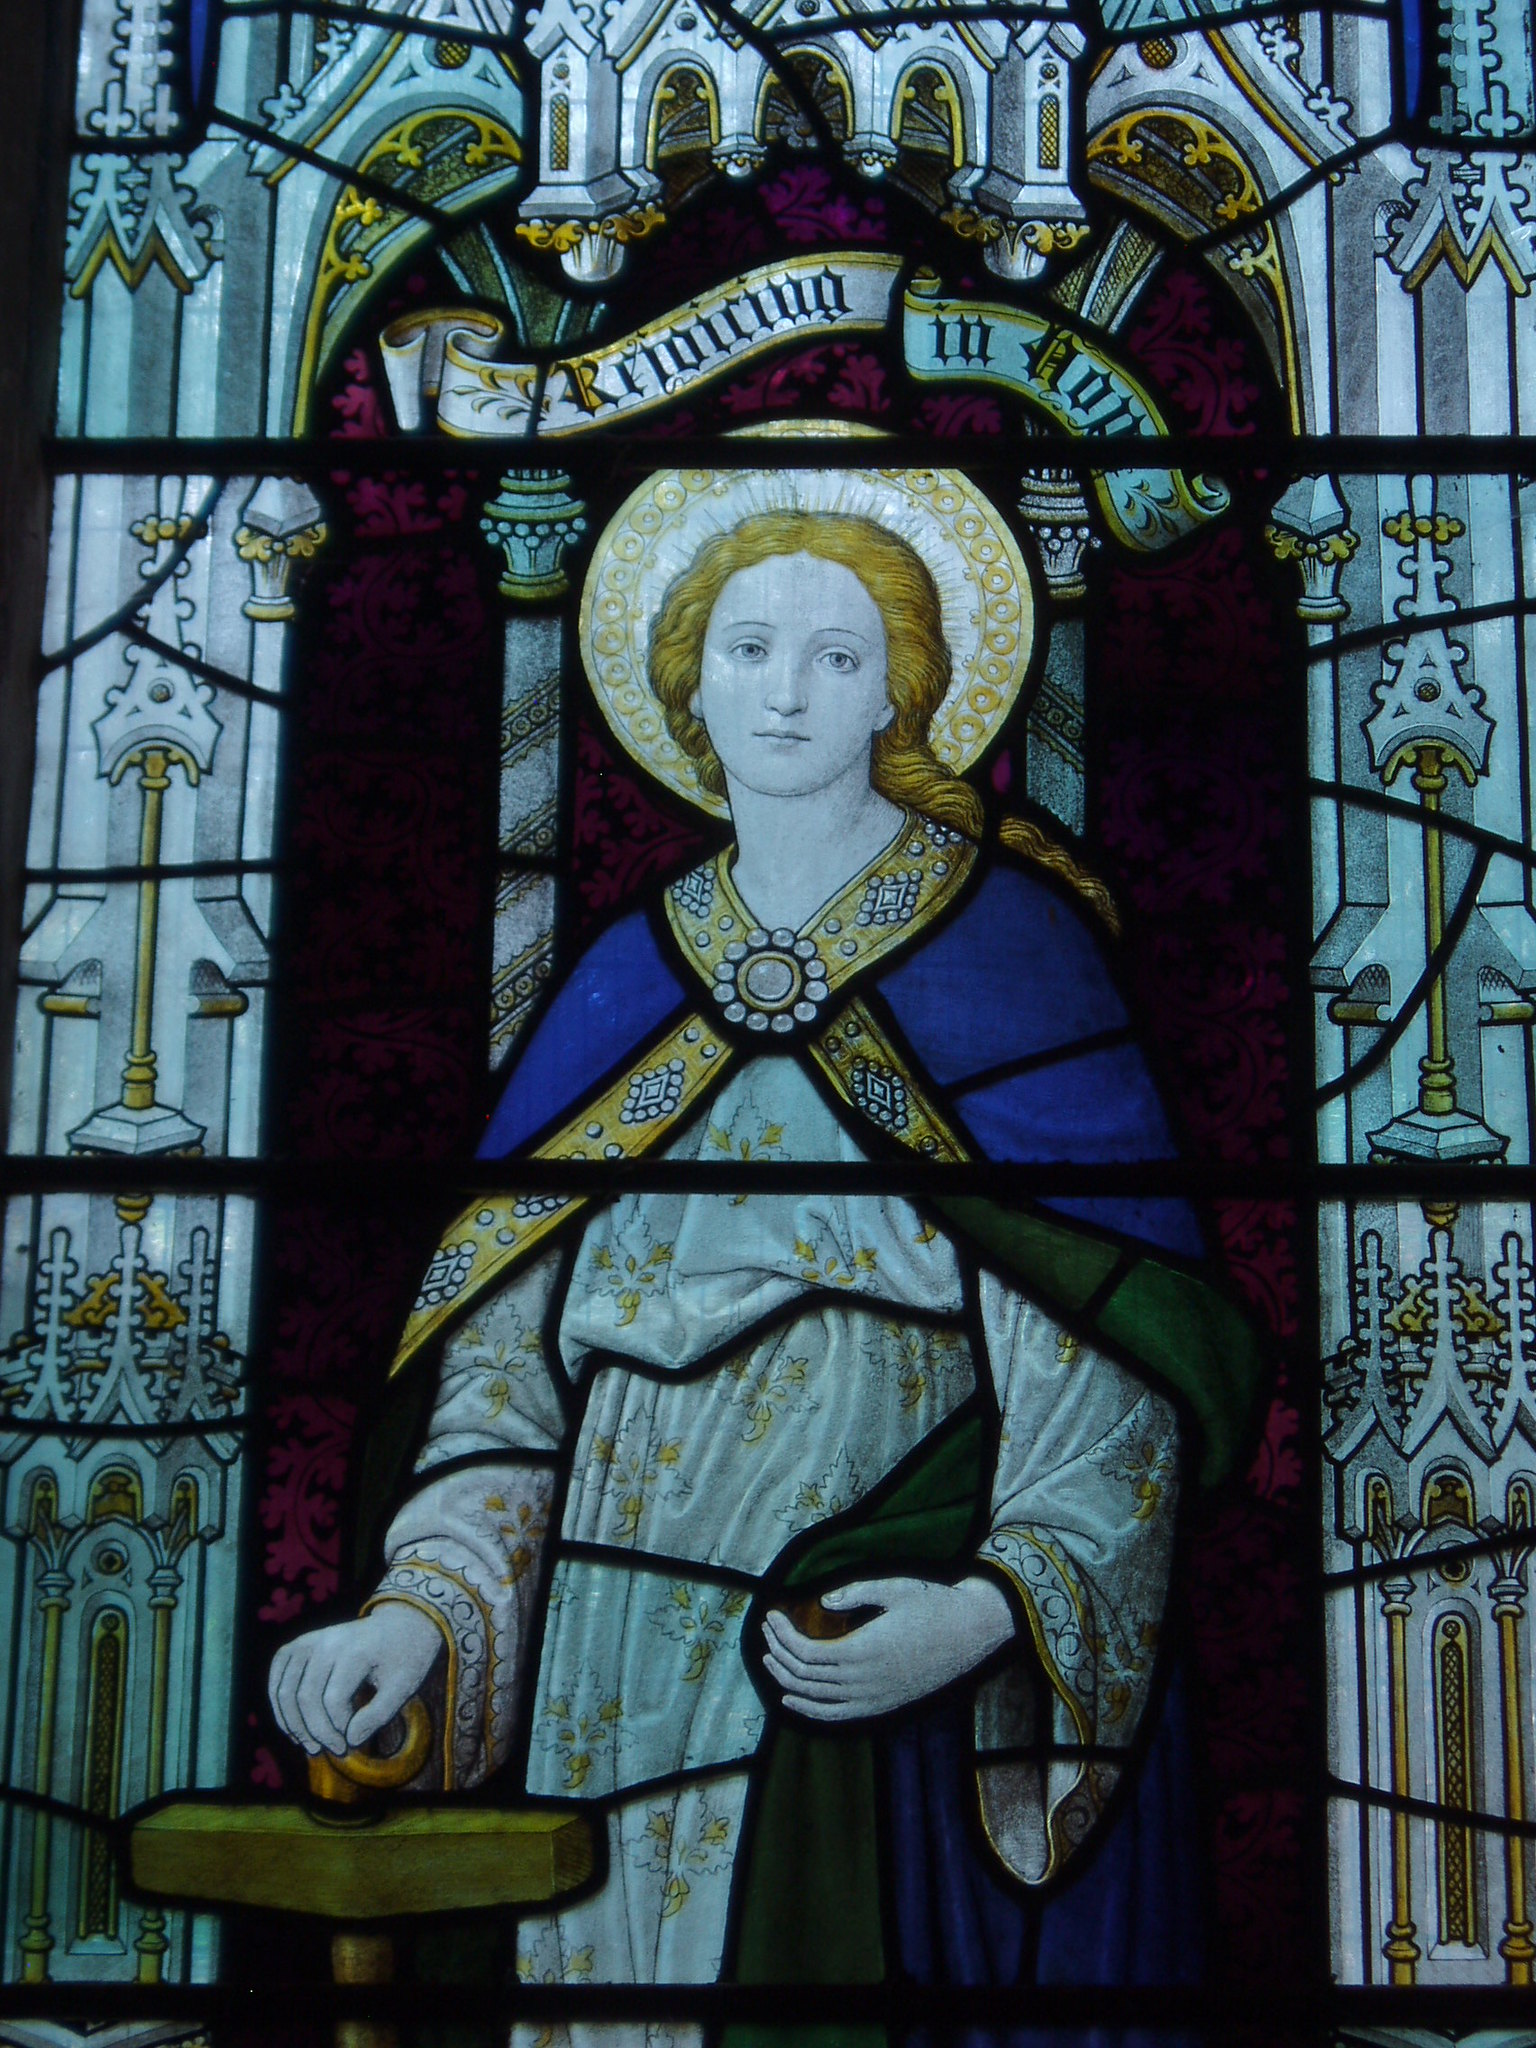 Hope, Mickleton North aisle window by Burlison & Grylls, c1927. St Lawrence's church at Mickleton is a fairly large building with a Transitional nave flanked by unusually spacious aisles and surmounted by a soaring steeple at the west end. The nave arcades show the transition from Norman to Gothic styles in their broad round arches and carved capitals. The church was restored by Preedy in 1868, the glass in the east window is his work. This attractive church is normally open and welcoming to visitors in daylight hours.